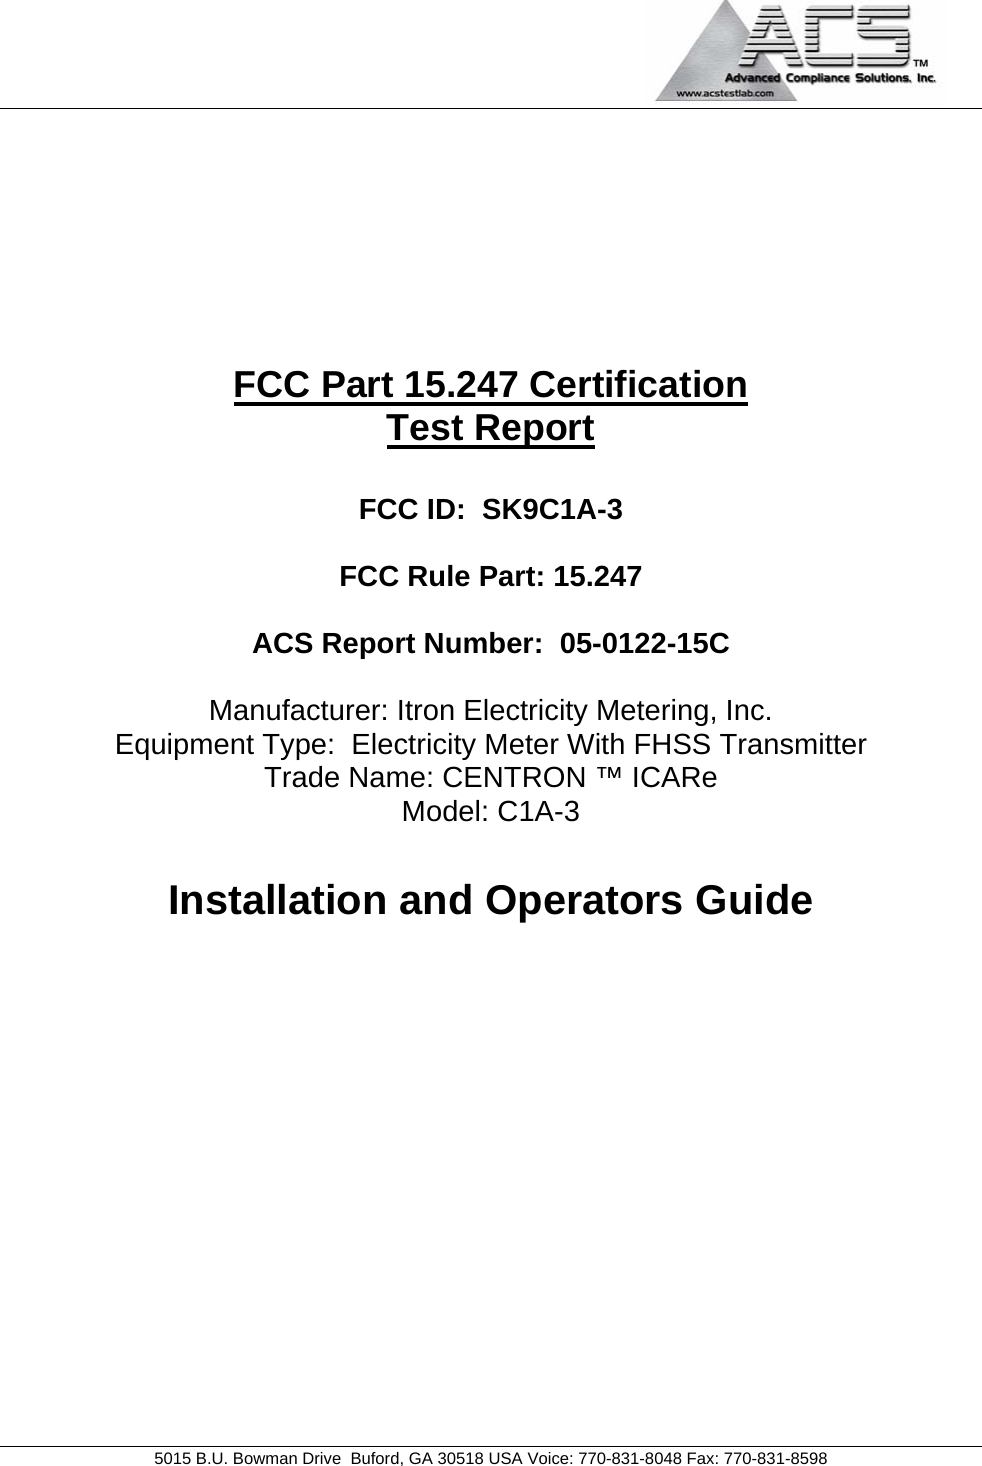                                             5015 B.U. Bowman Drive  Buford, GA 30518 USA Voice: 770-831-8048 Fax: 770-831-8598        FCC Part 15.247 Certification Test Report  FCC ID:  SK9C1A-3  FCC Rule Part: 15.247  ACS Report Number:  05-0122-15C   Manufacturer: Itron Electricity Metering, Inc. Equipment Type:  Electricity Meter With FHSS Transmitter Trade Name: CENTRON ™ ICARe Model: C1A-3  Installation and Operators Guide           